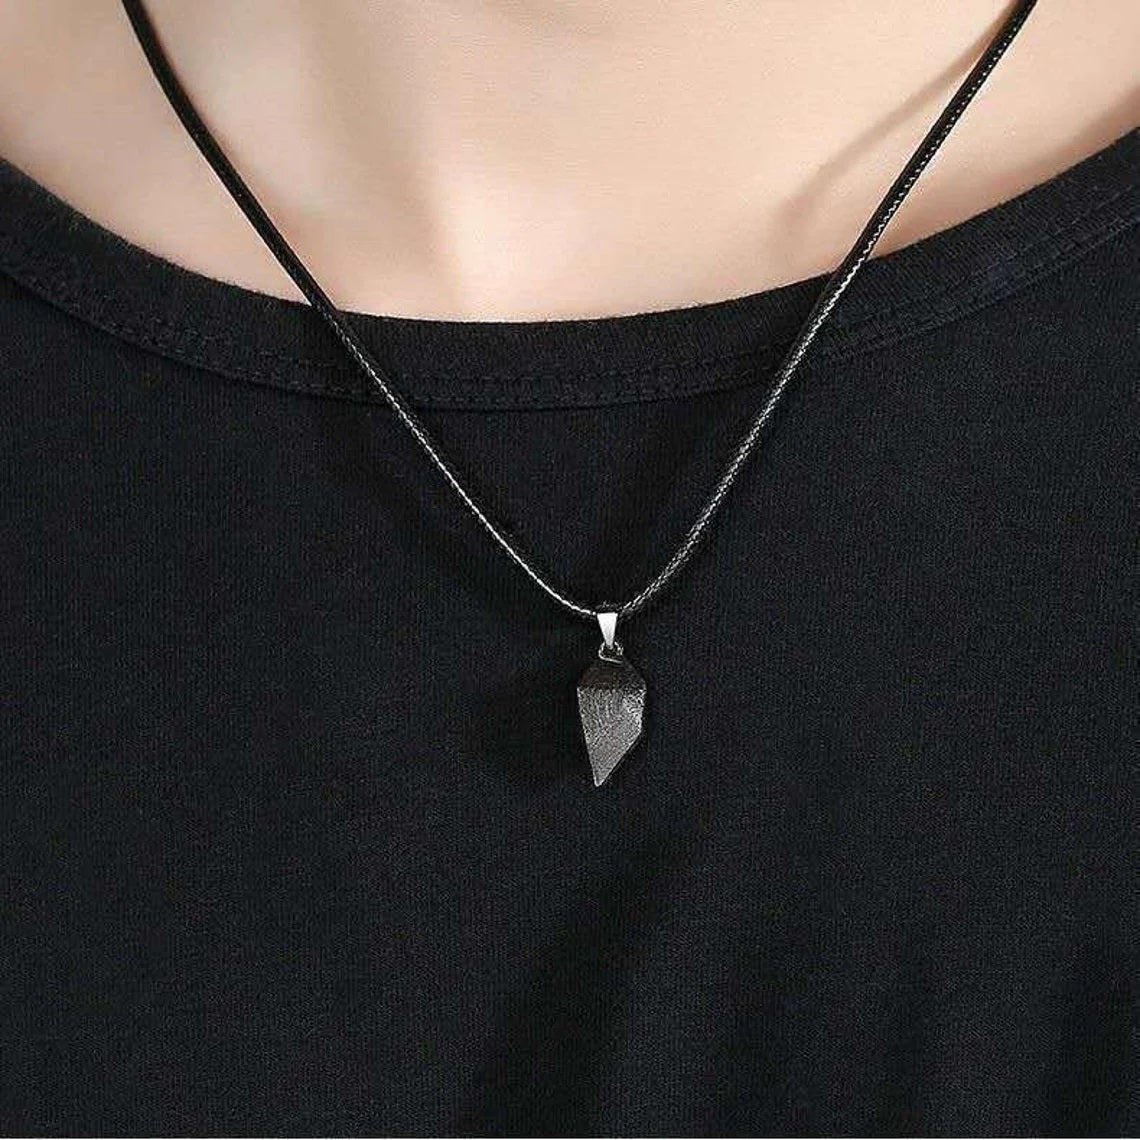 yang necklace Magnetic Necklace Couples Chi Yang Necklace | eBay